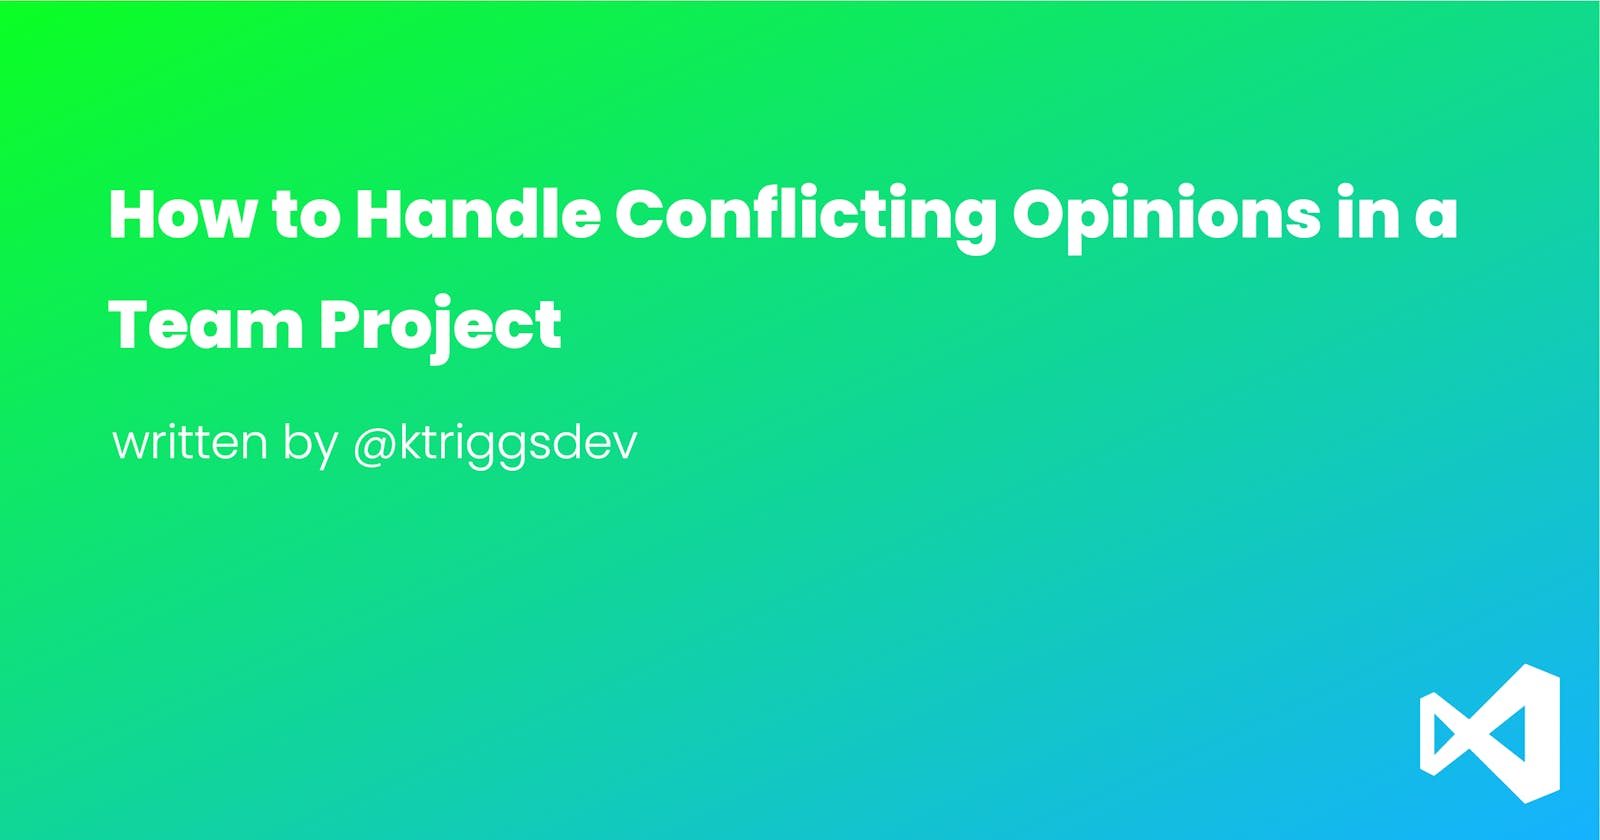 How to Handle Conflicting Opinions in a Team Project